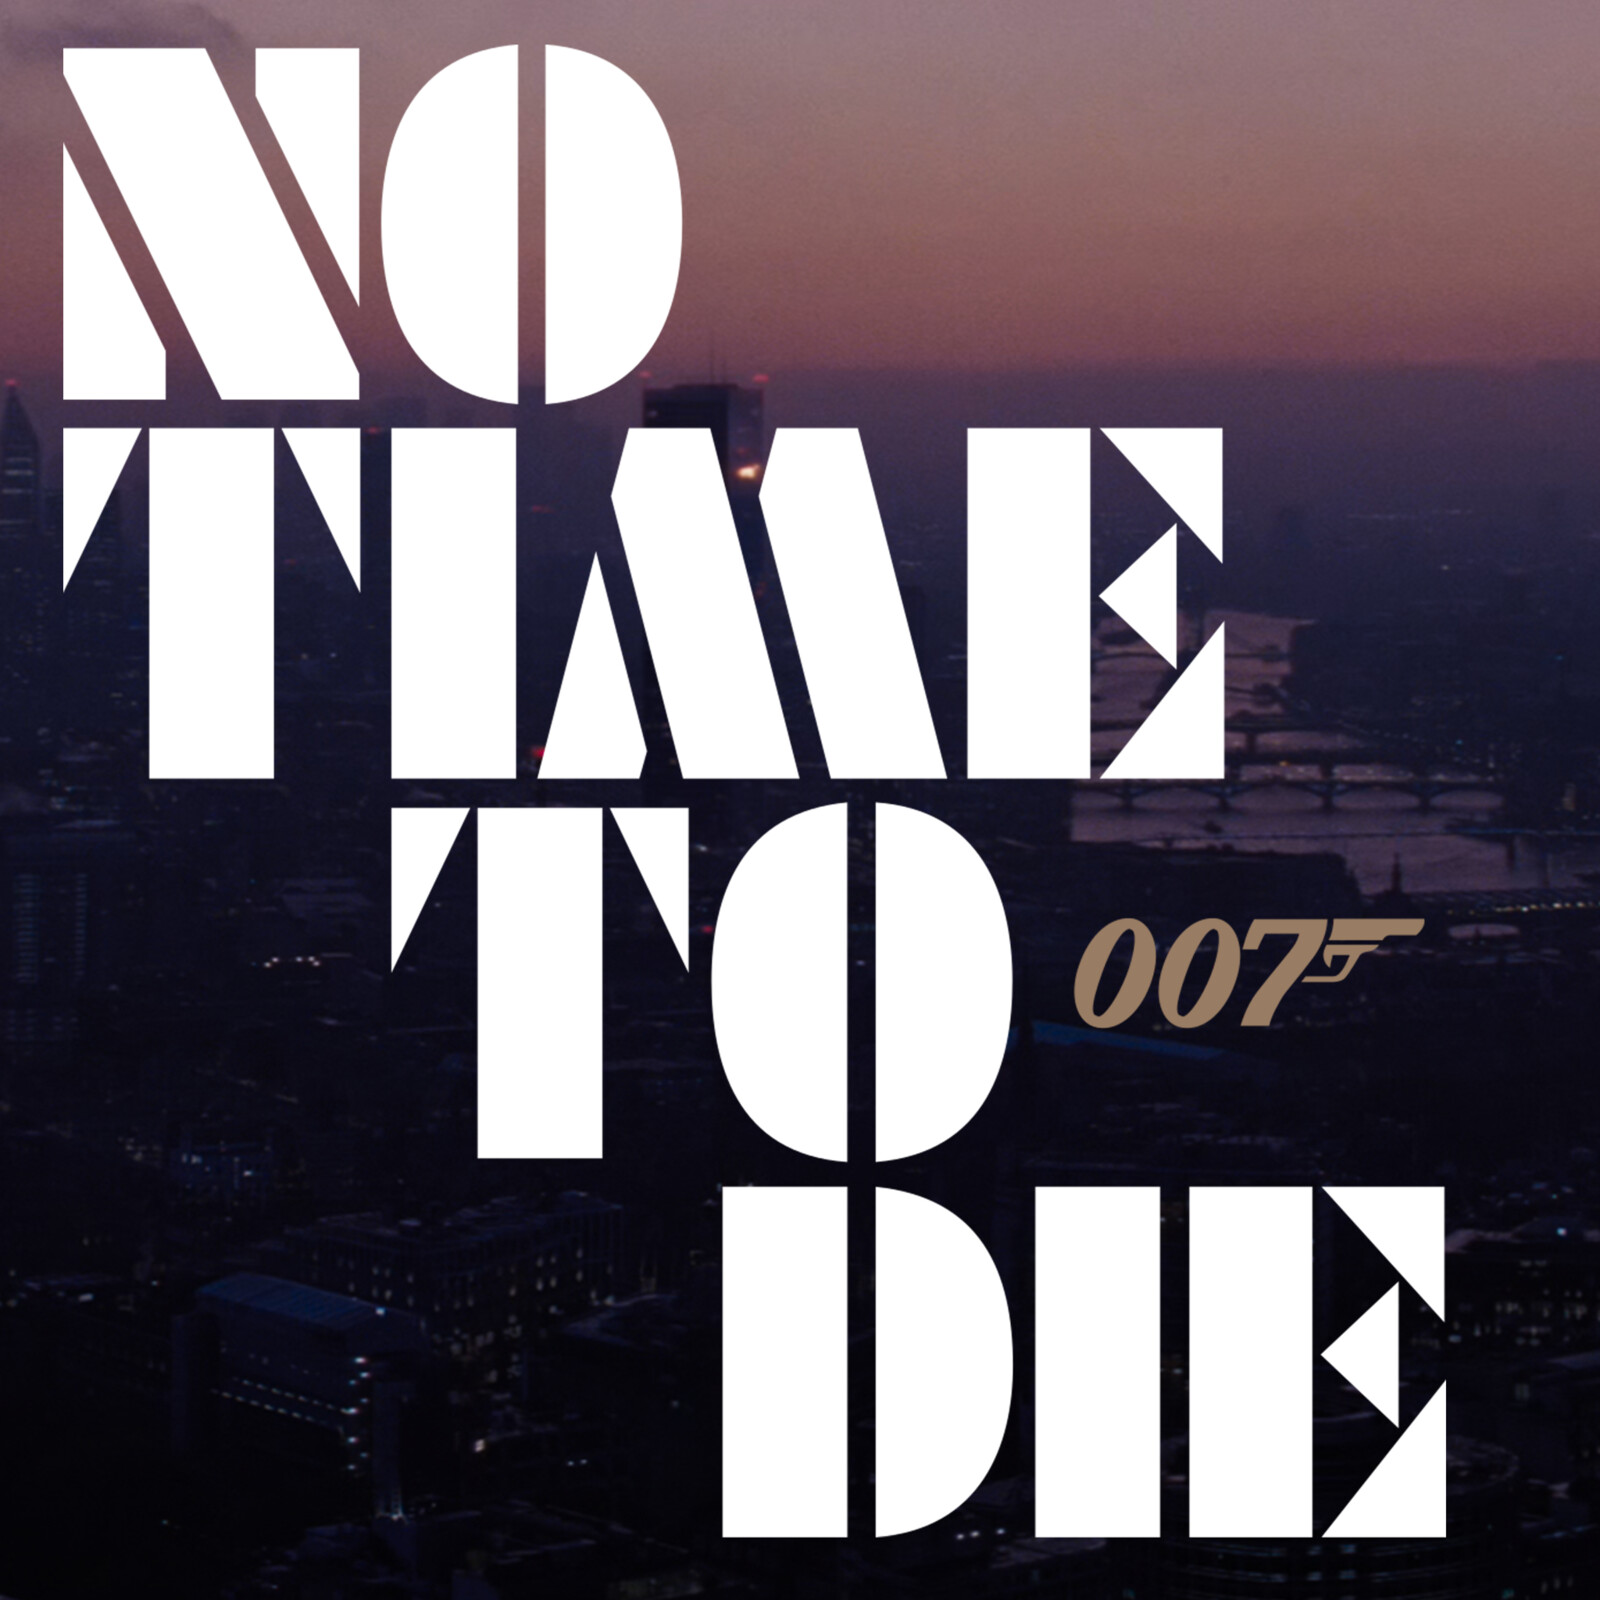 James Bond - No Time To Die / Environments